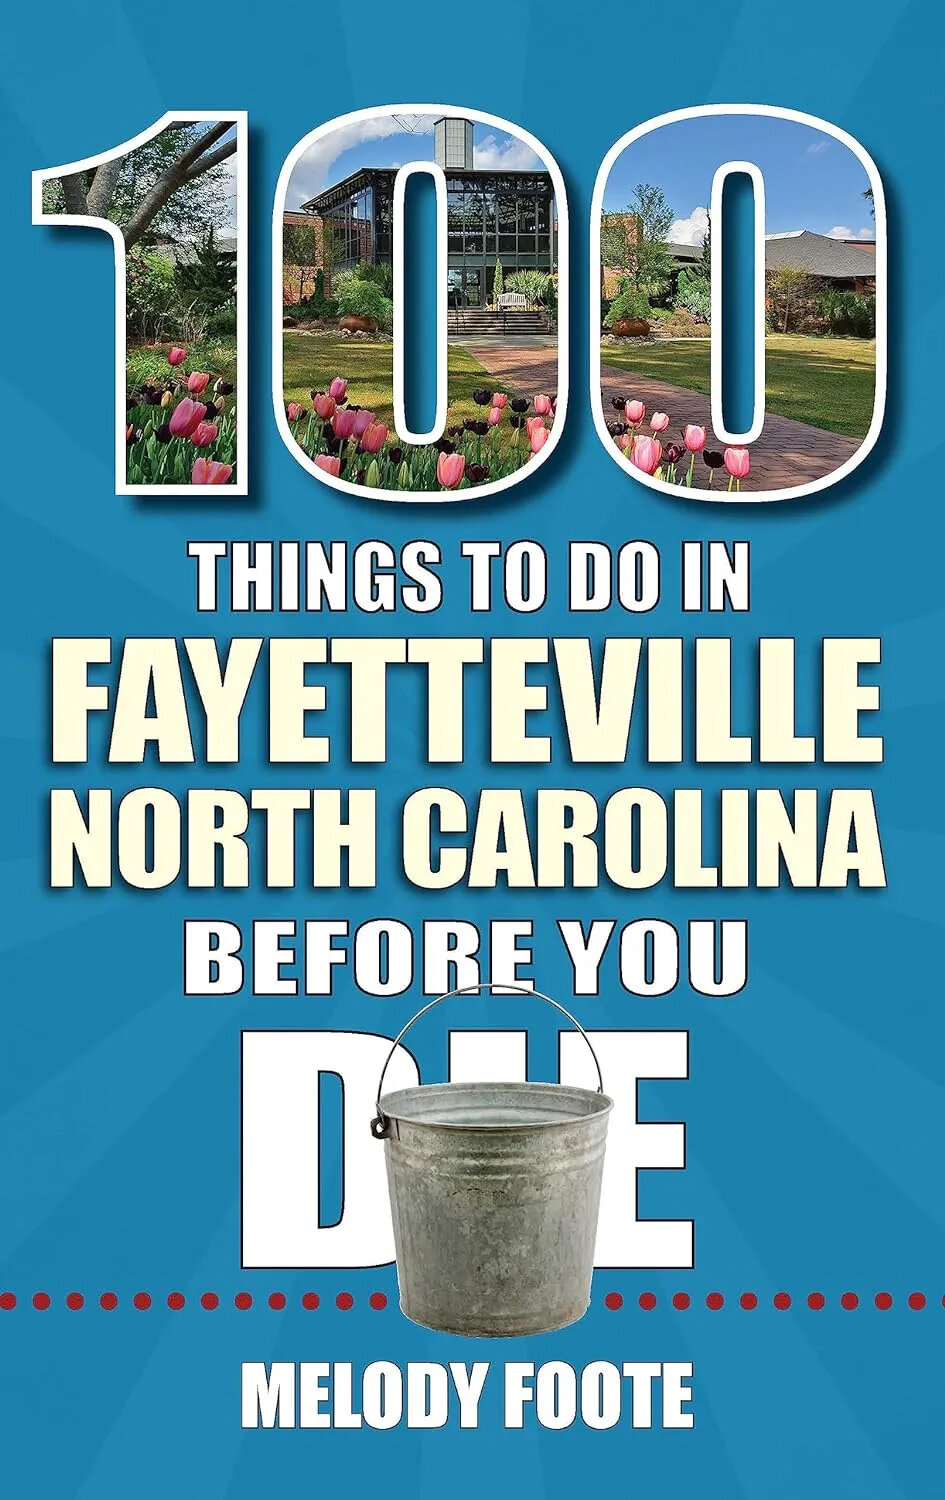 '100 Things to Do in Fayetteville, North Carolina, Before You Die,' by Melody Foote
142 pages
Published by Reedy Press, based in St. Louis
Retail price $18; available online or in bookstores, including City Center Gallery & Gifts in downtown Fayetteville